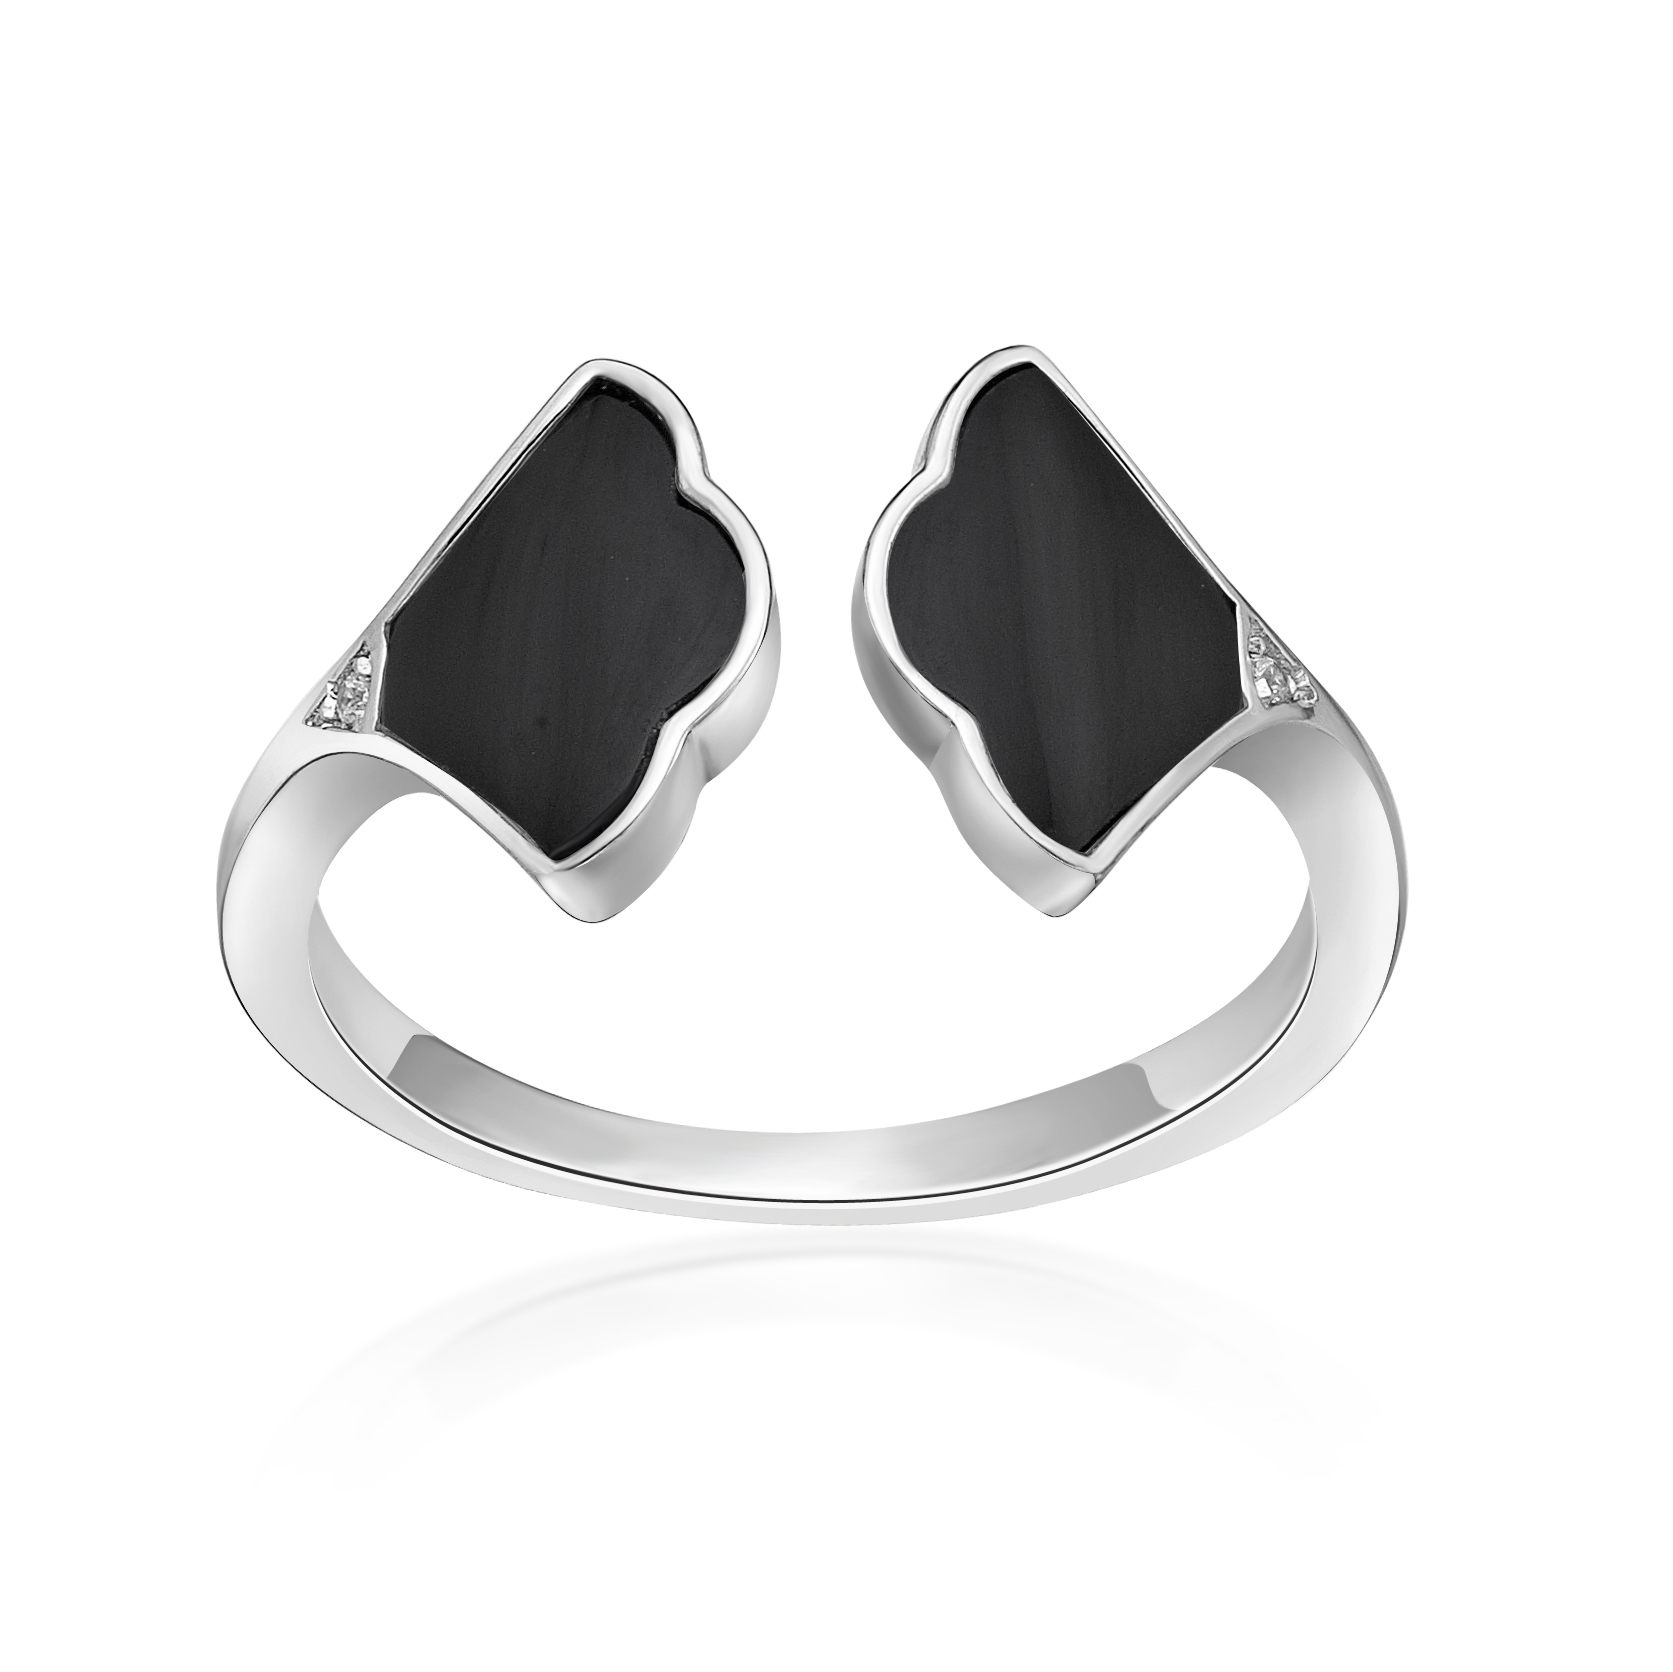 48849-ring-color-sterling-silver-2-1.jpg